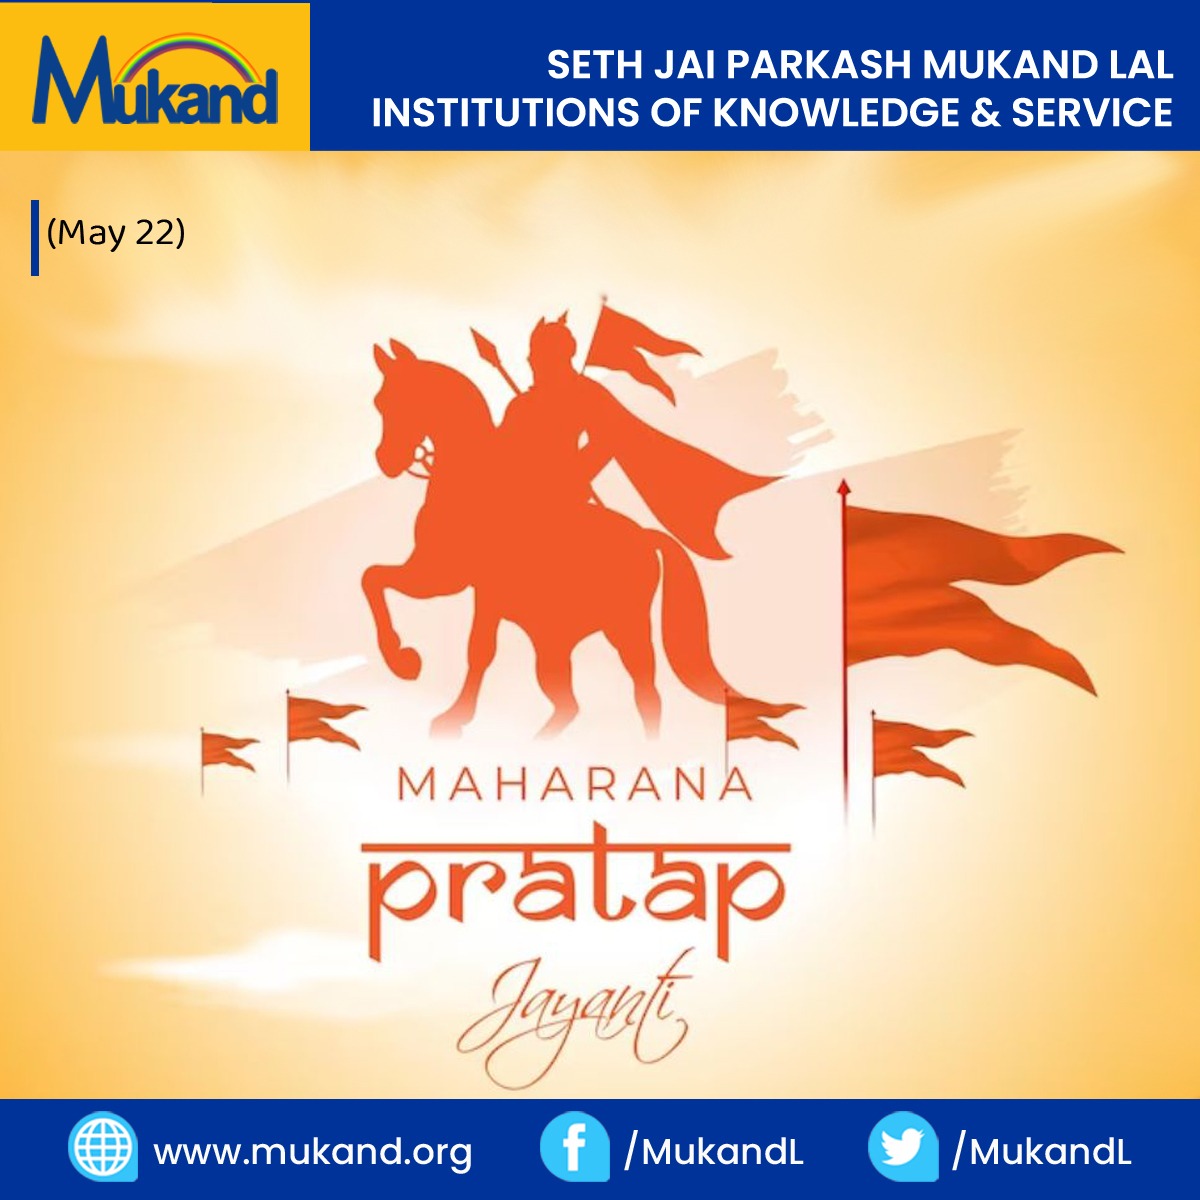 On the occasion of Maharana Pratap Jayanti, may his tales of bravery and strength inspire you. Warm wishes on Maharana Pratap Jayanti!